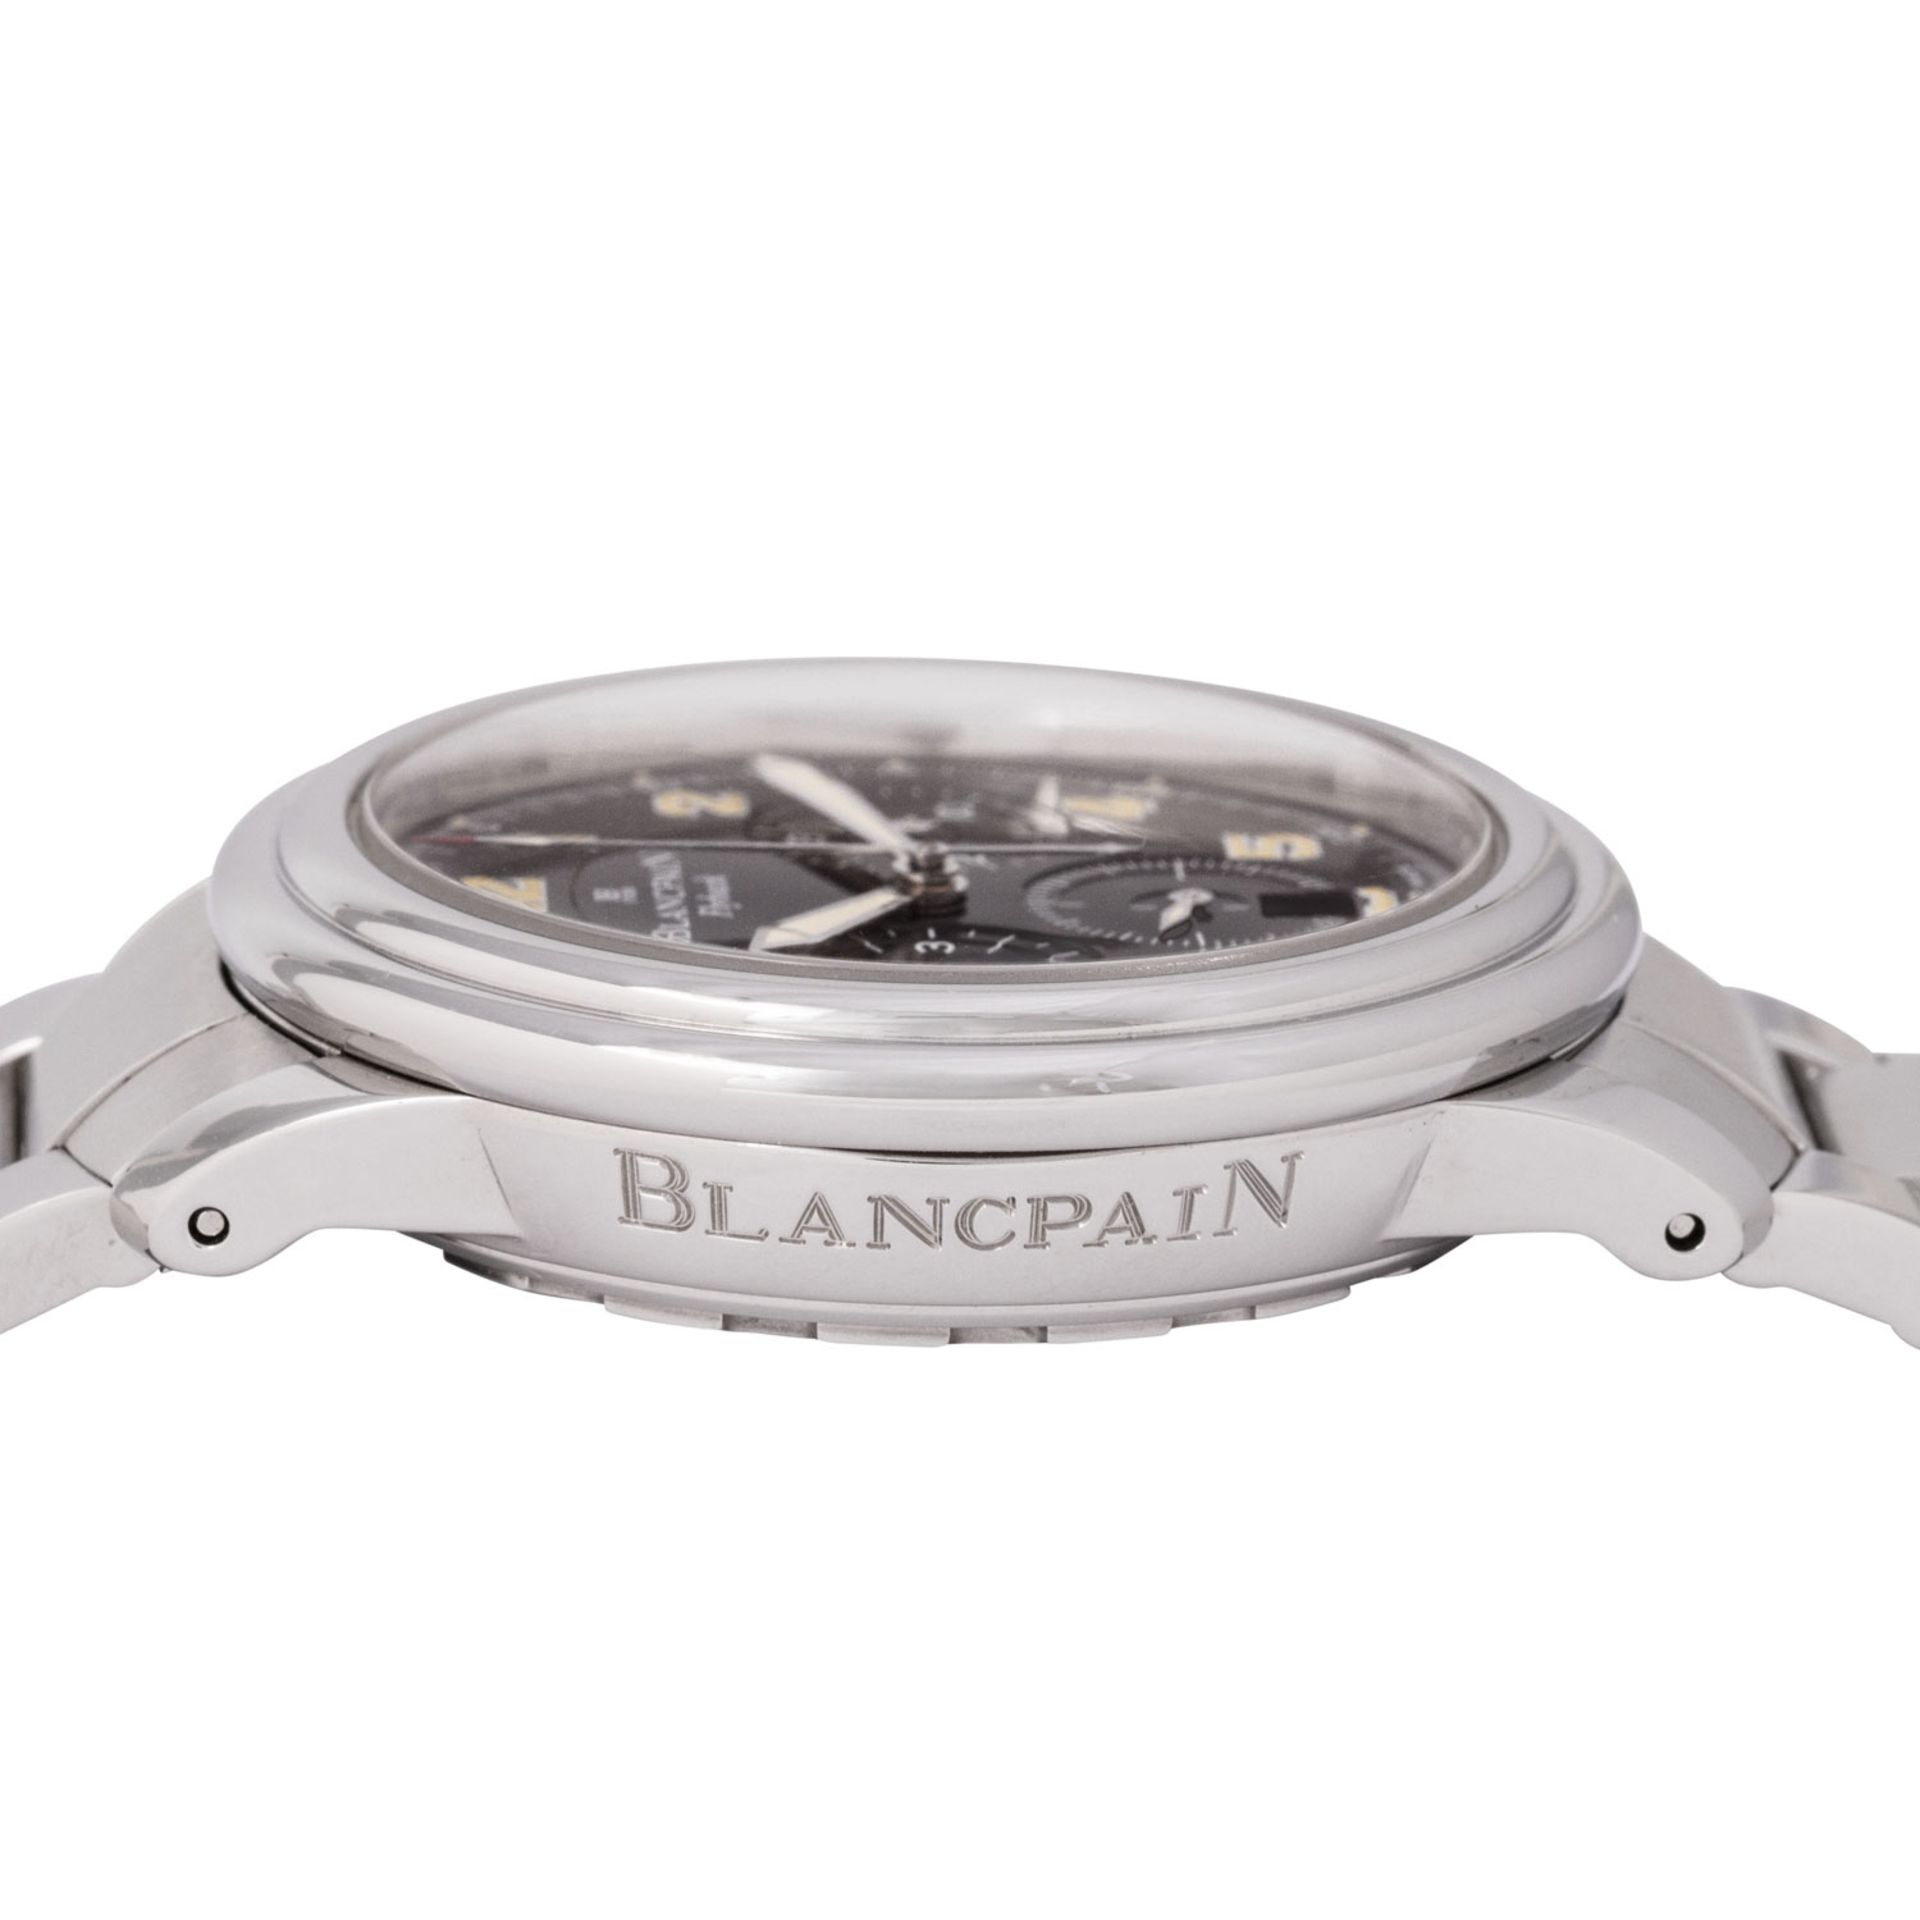 BLANCPAIN Lemán Flyback Chronograph Ref. 2185F von 1997. - Image 4 of 8